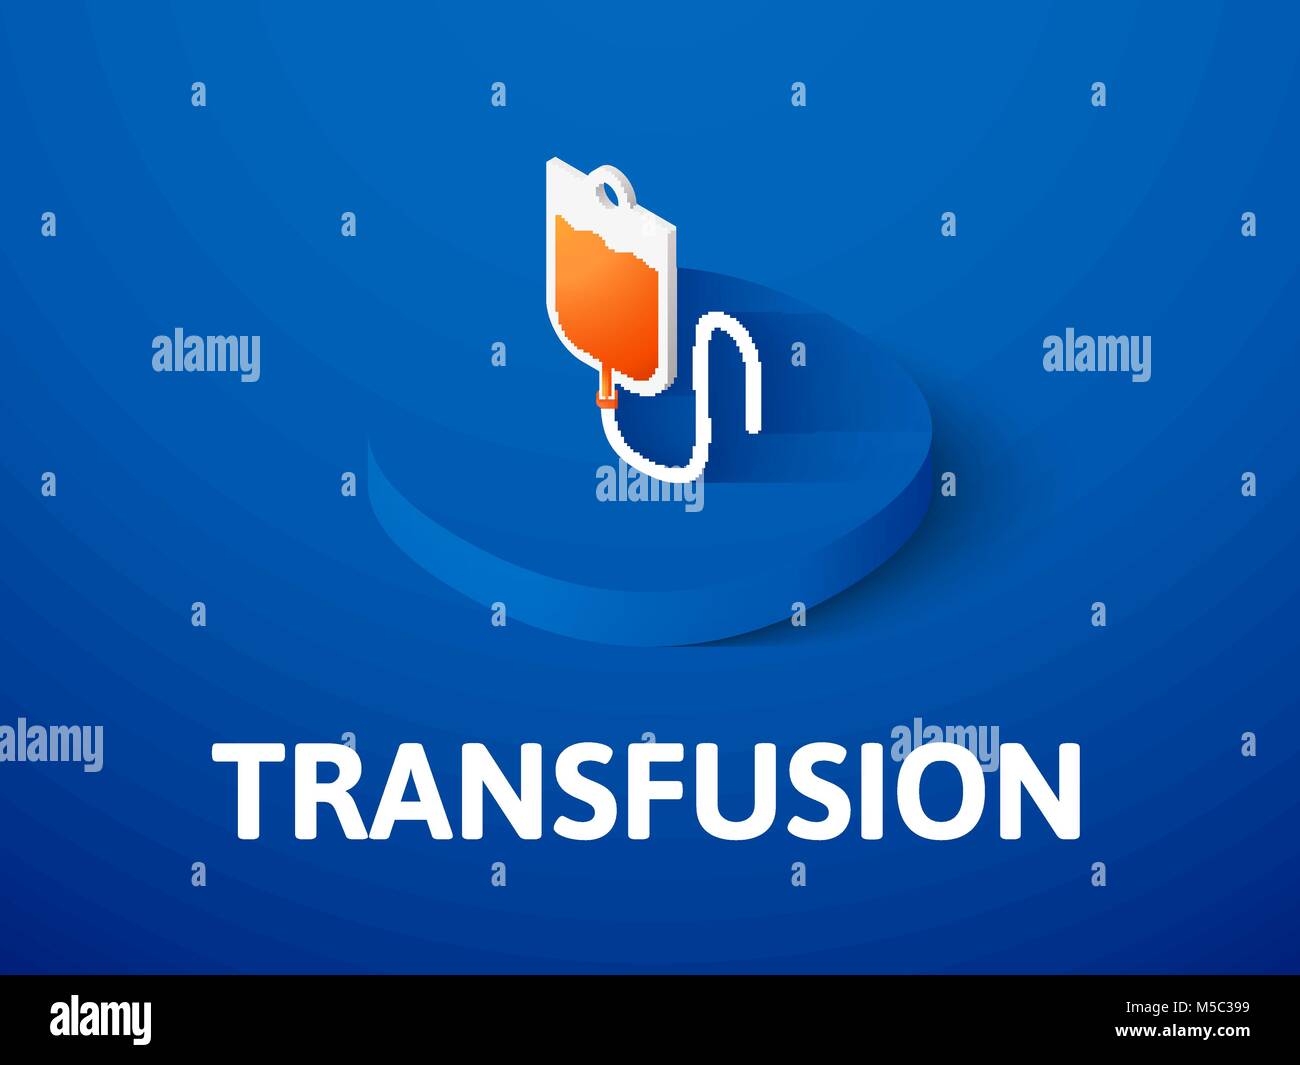 Transfusion isometric icon, isolated on color background Stock Vector